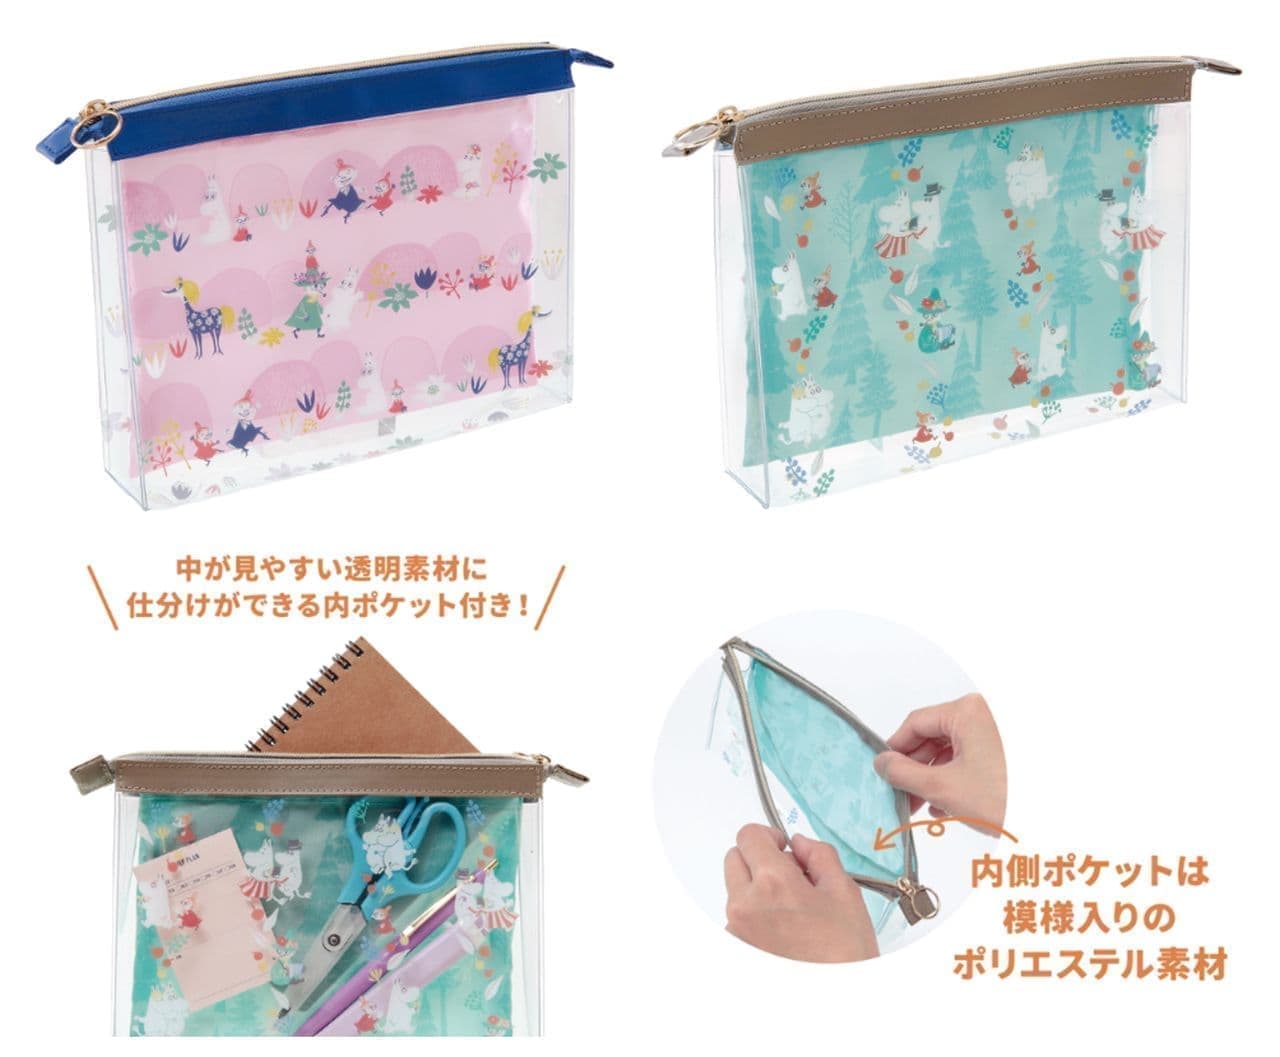 Moomin stationery series "Pen Pouch M